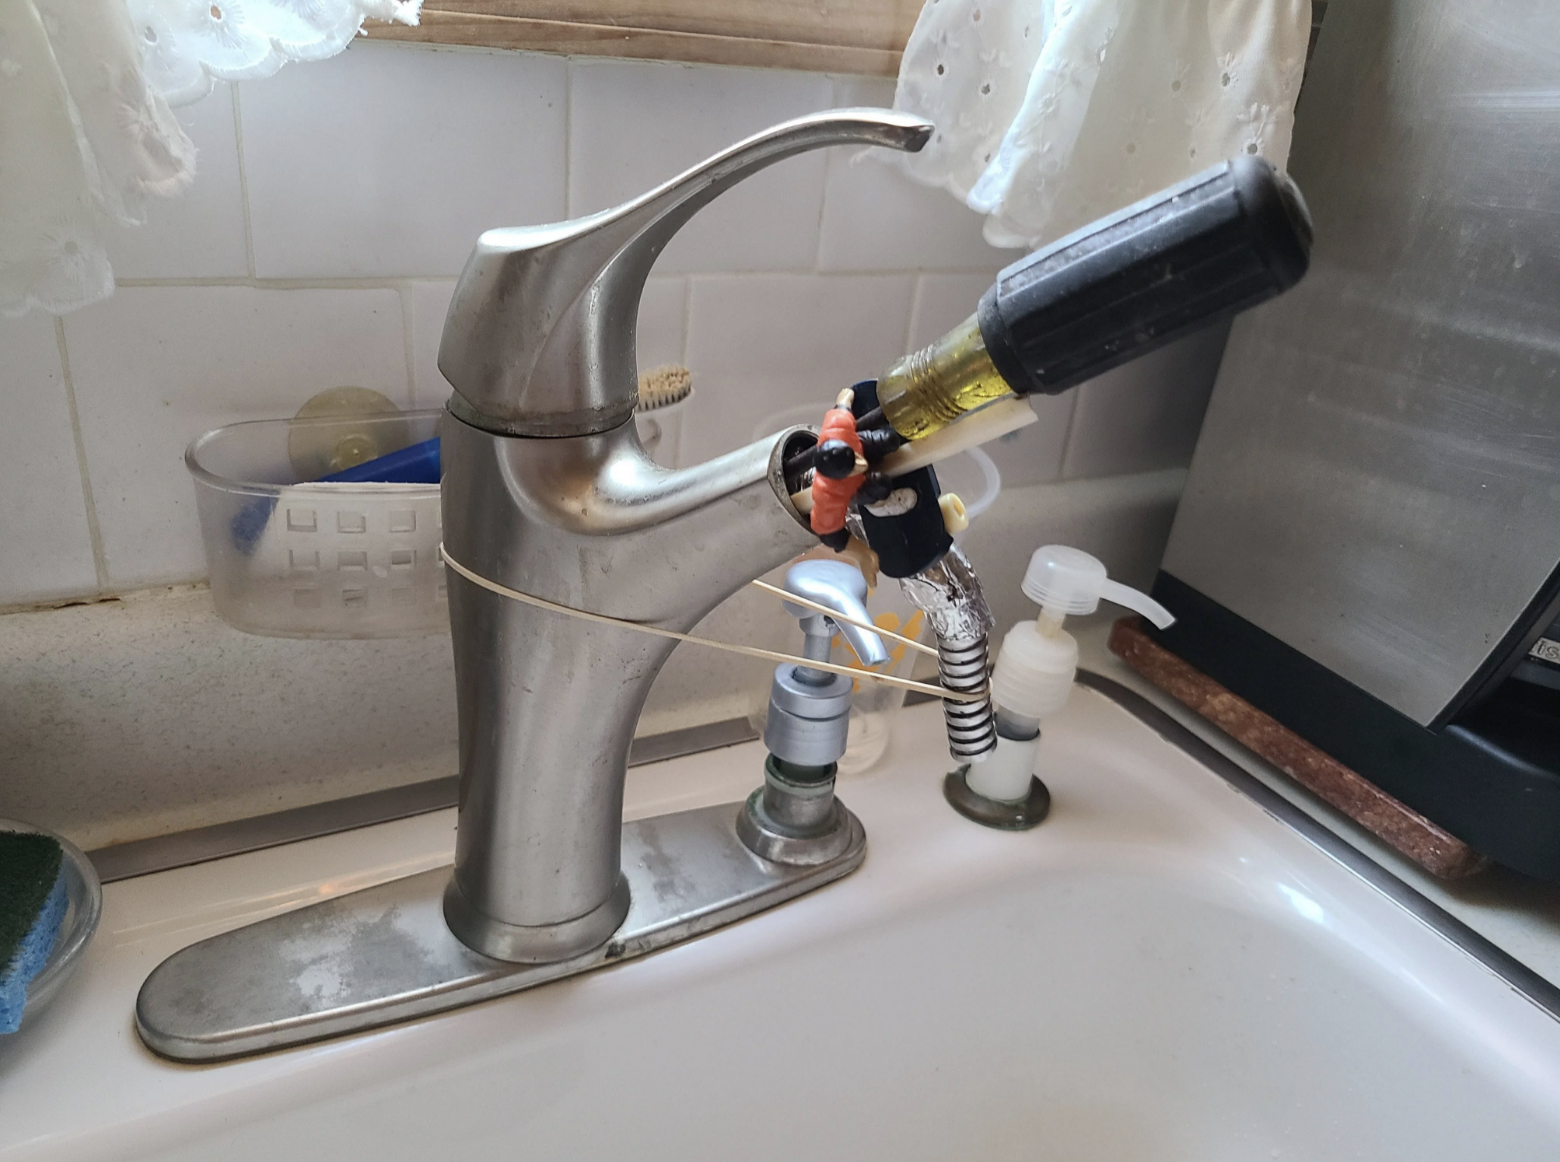 A screwdriver in the kitchen sink